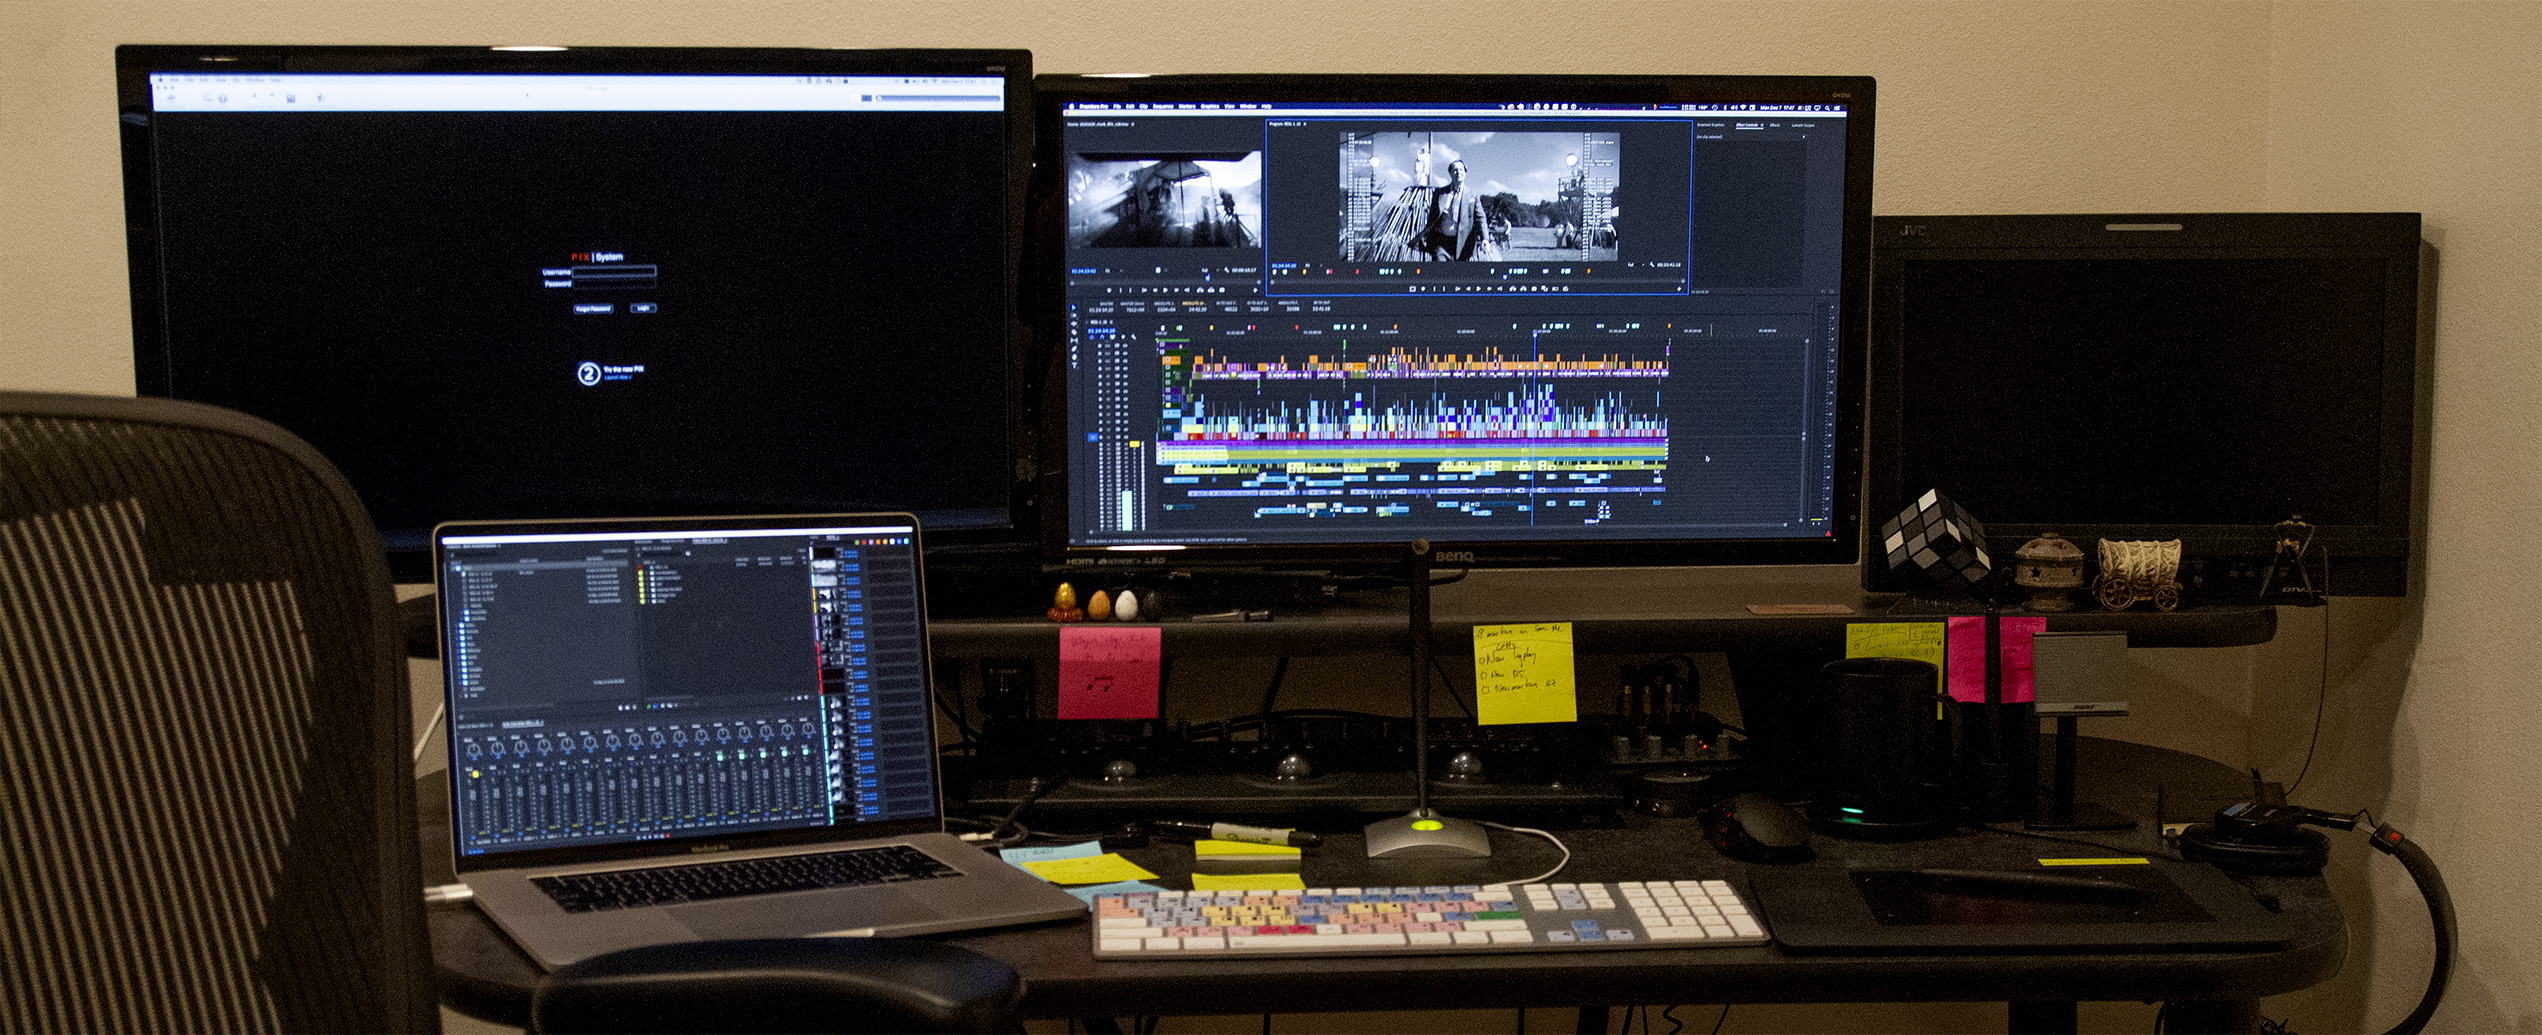 ART OF THE CUT on the workflows and methods for editing "Mank" 12